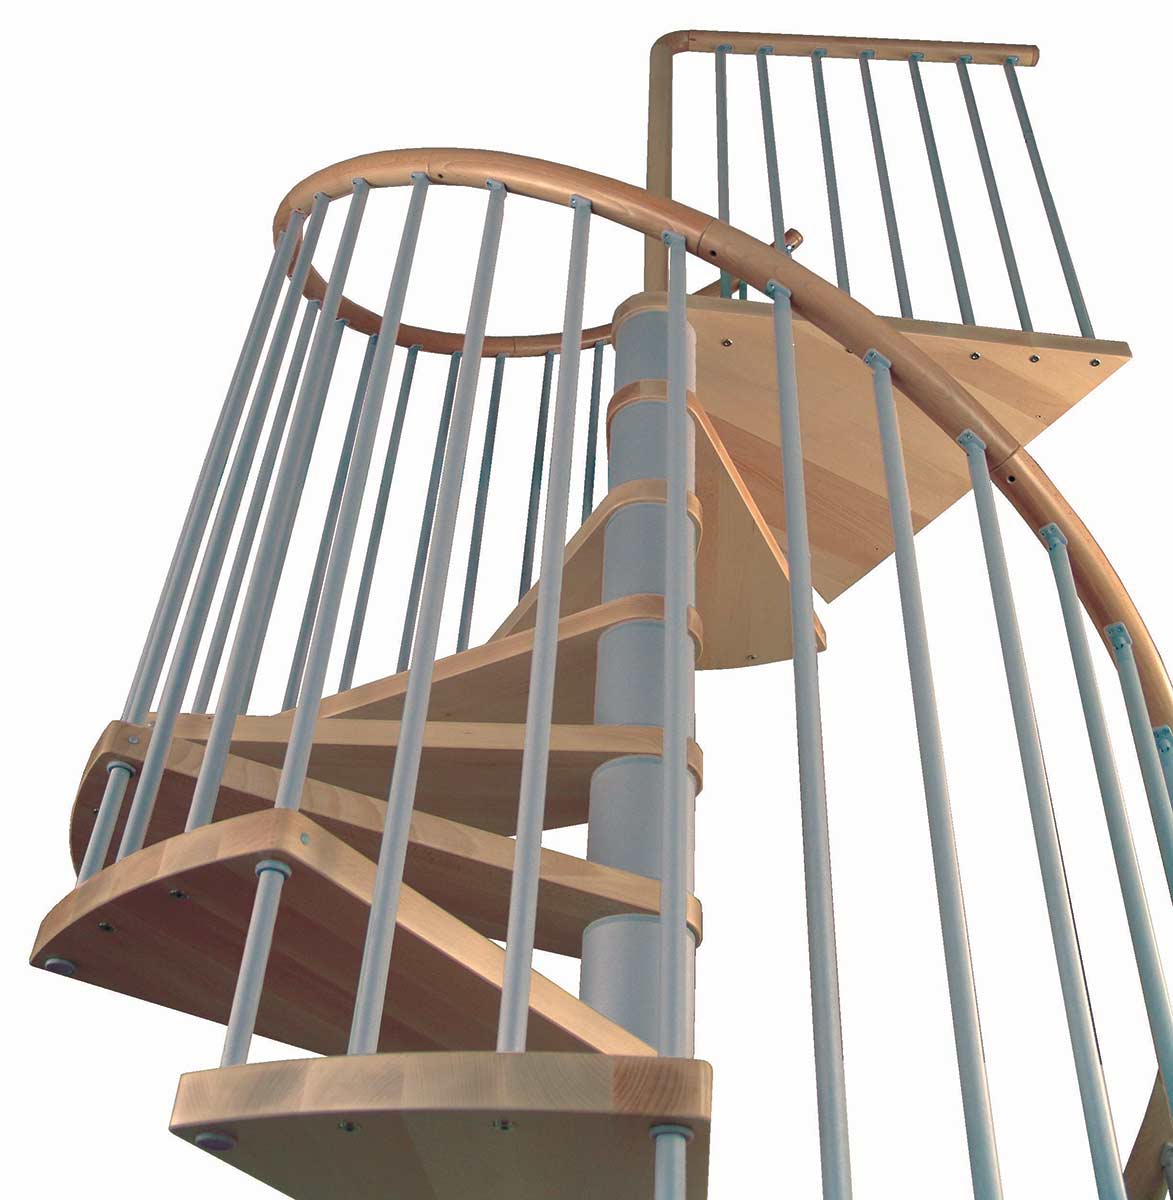 C20 Spiral Staircase